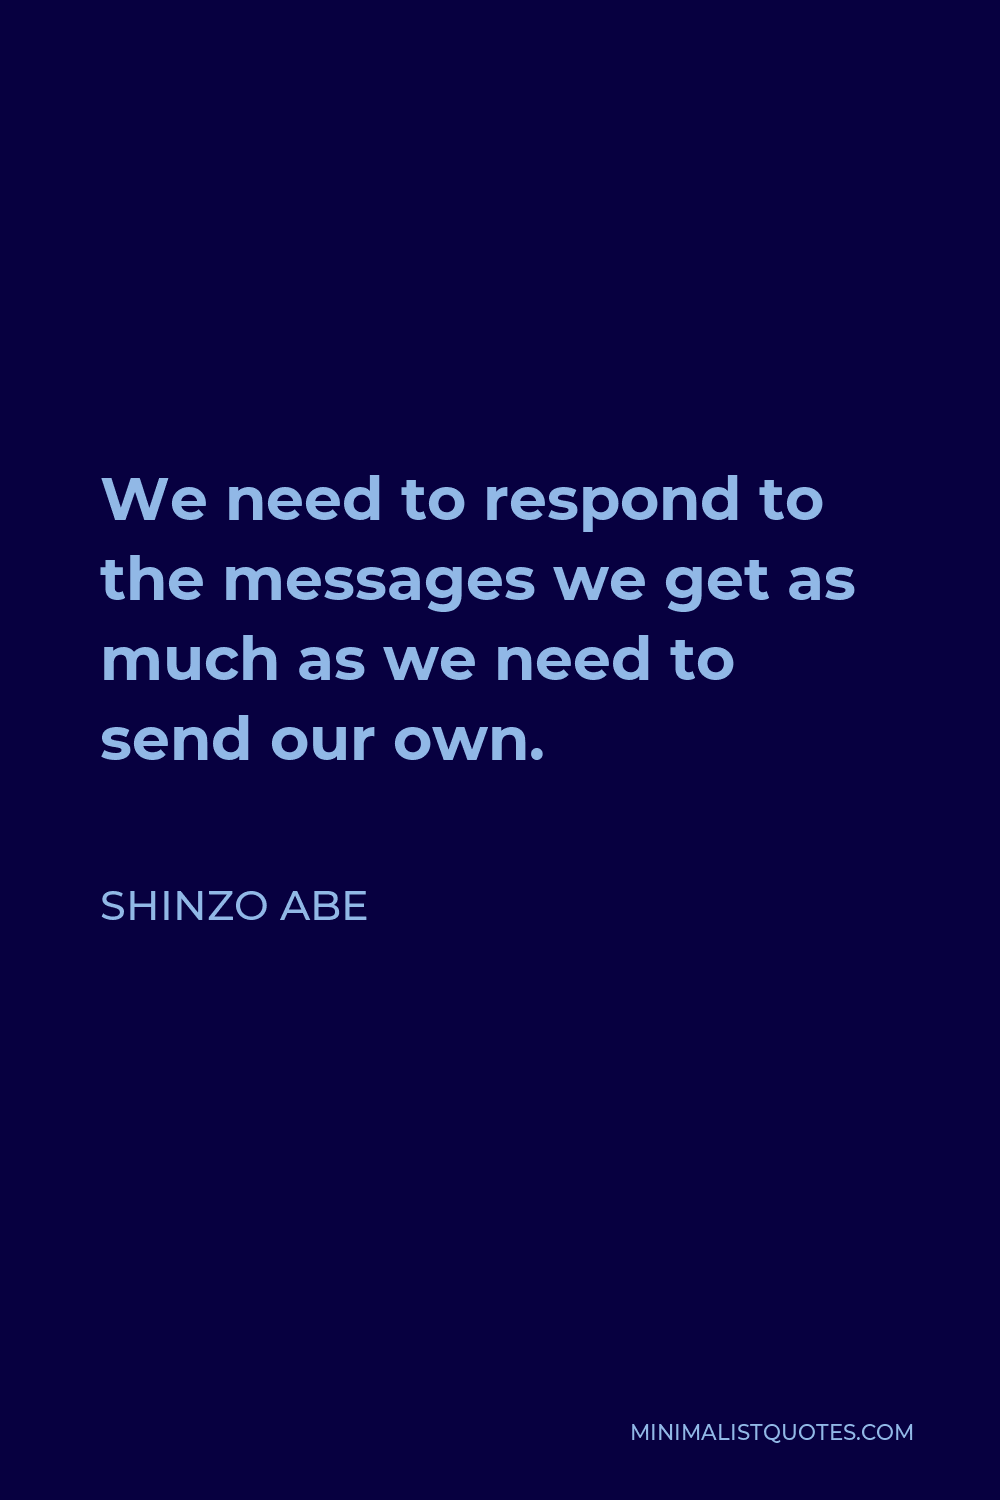 Shinzo Abe Quote - We need to respond to the messages we get as much as we need to send our own.